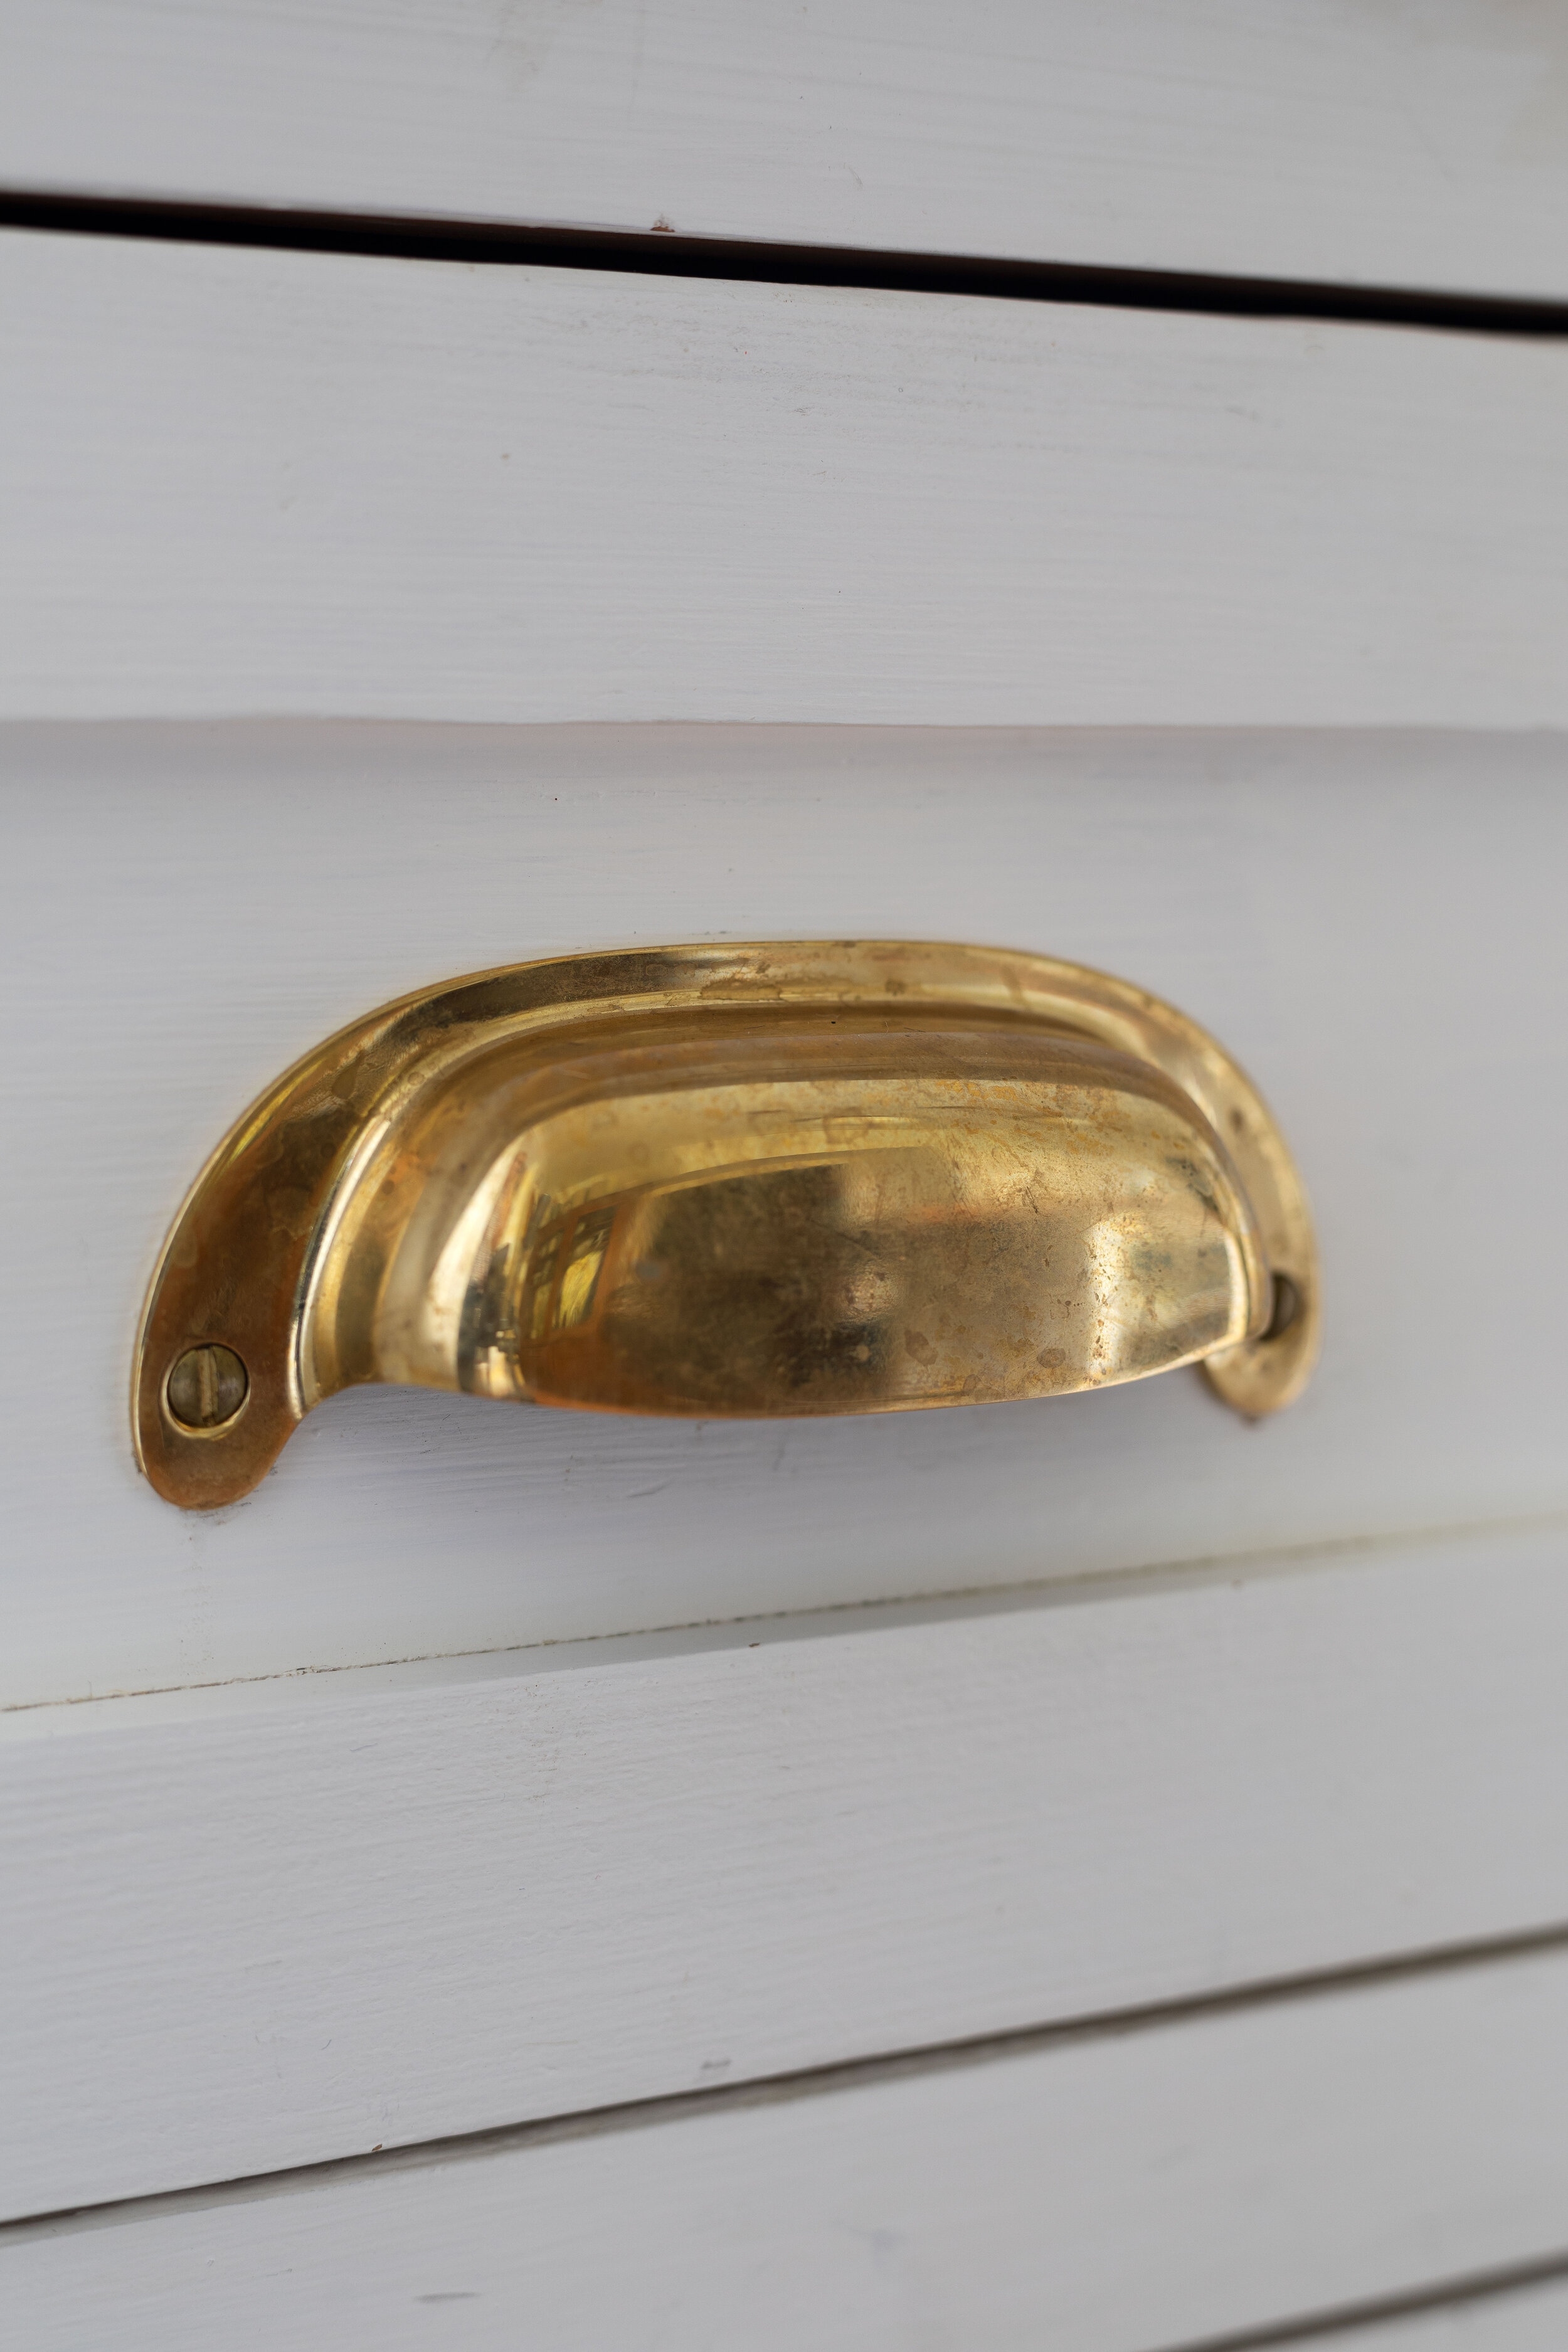 One Year of Age on Our Unlacquered Brass Hardware — The Grit and